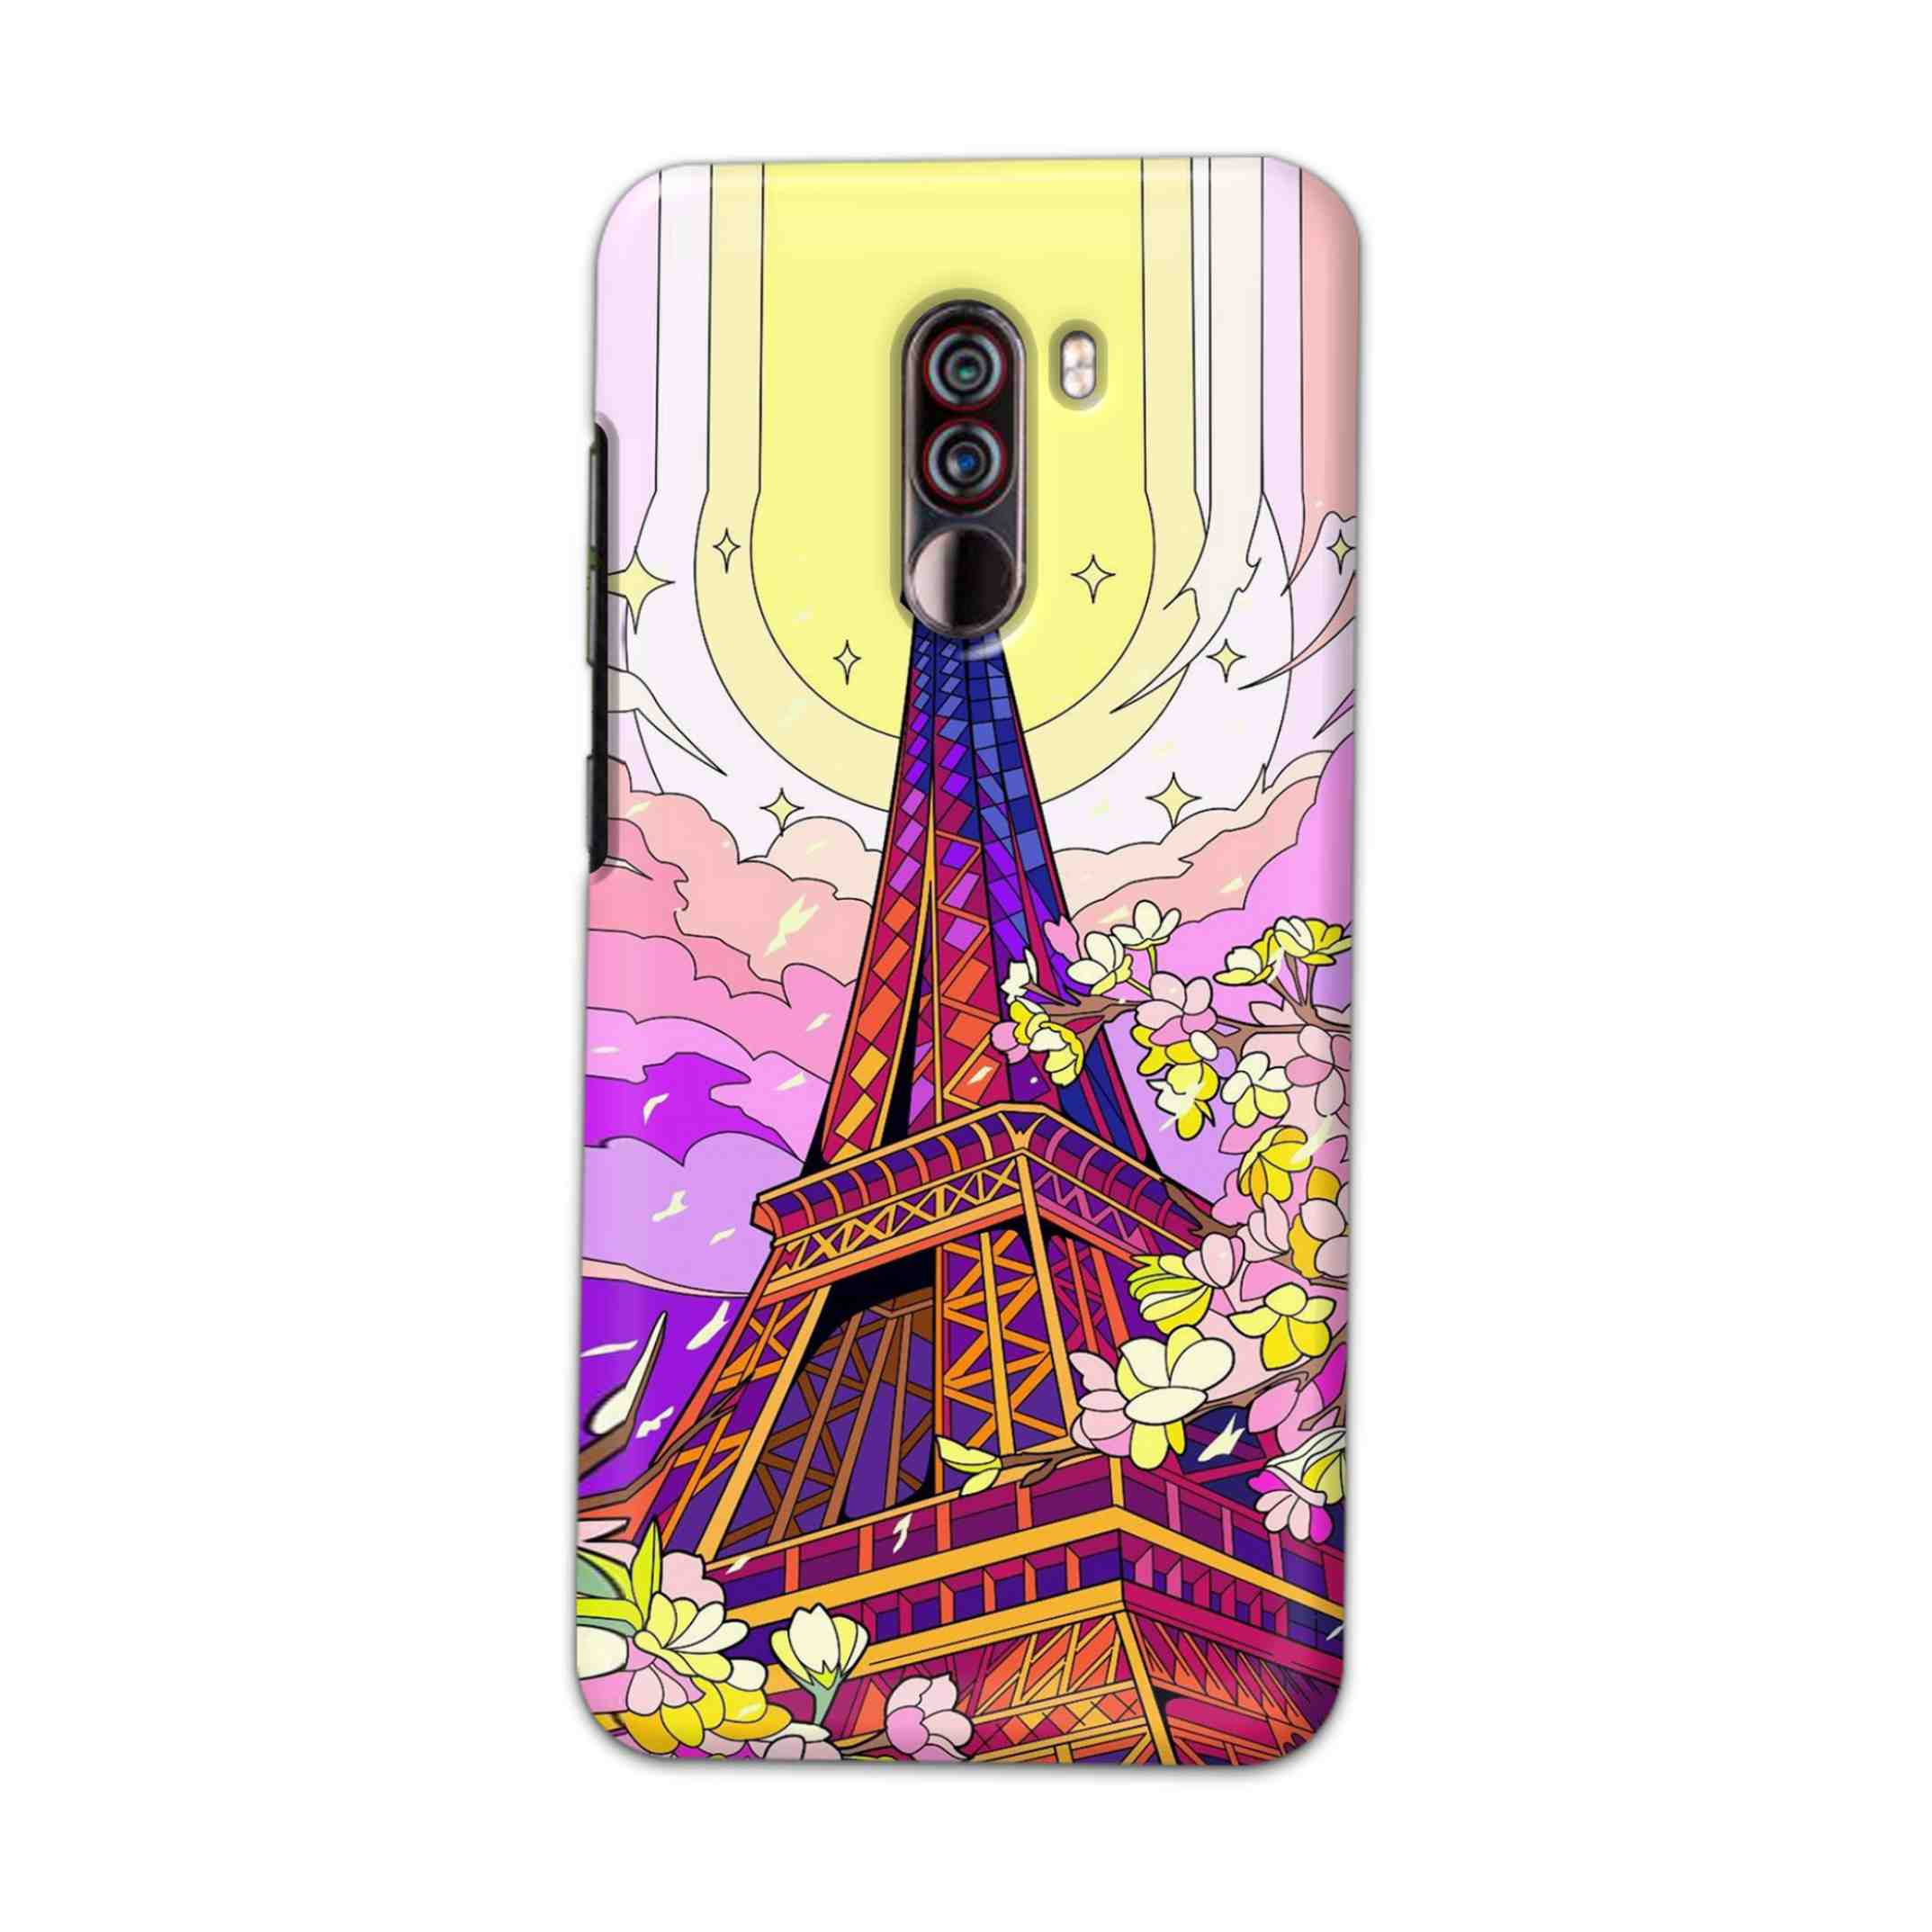 Buy Eiffel Tower Hard Back Mobile Phone Case Cover For Xiaomi Pocophone F1 Online